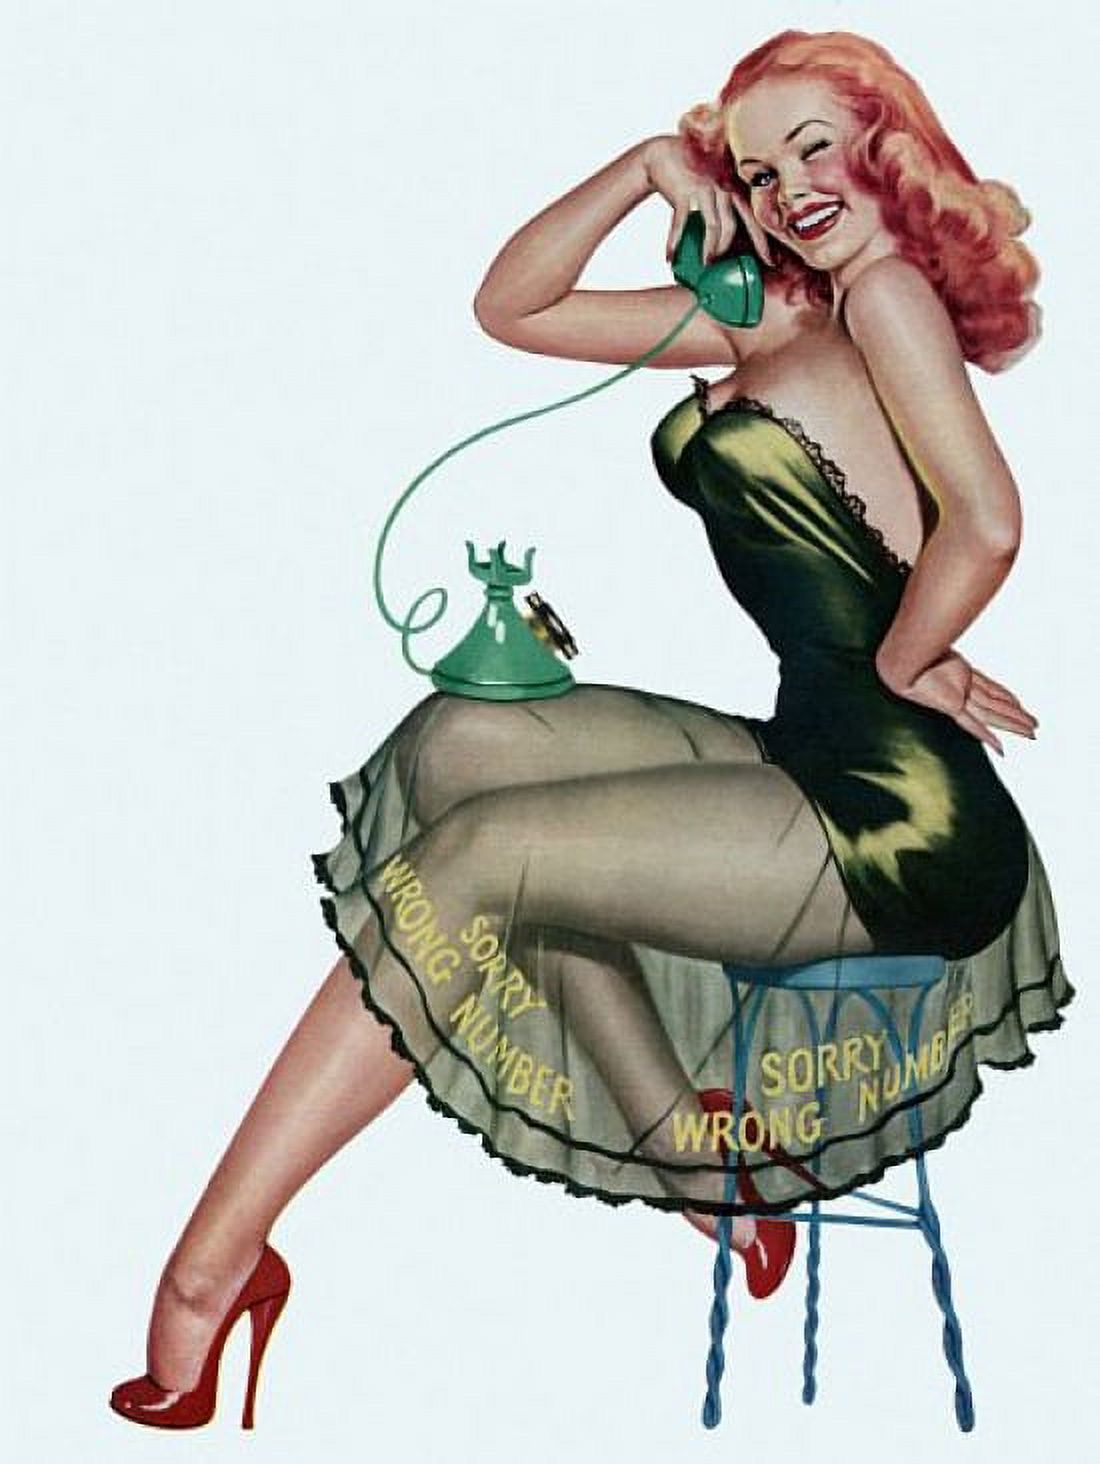 Pin Up Vintage Pinup Girl On Poster Print (24 x 36) - image 1 of 1